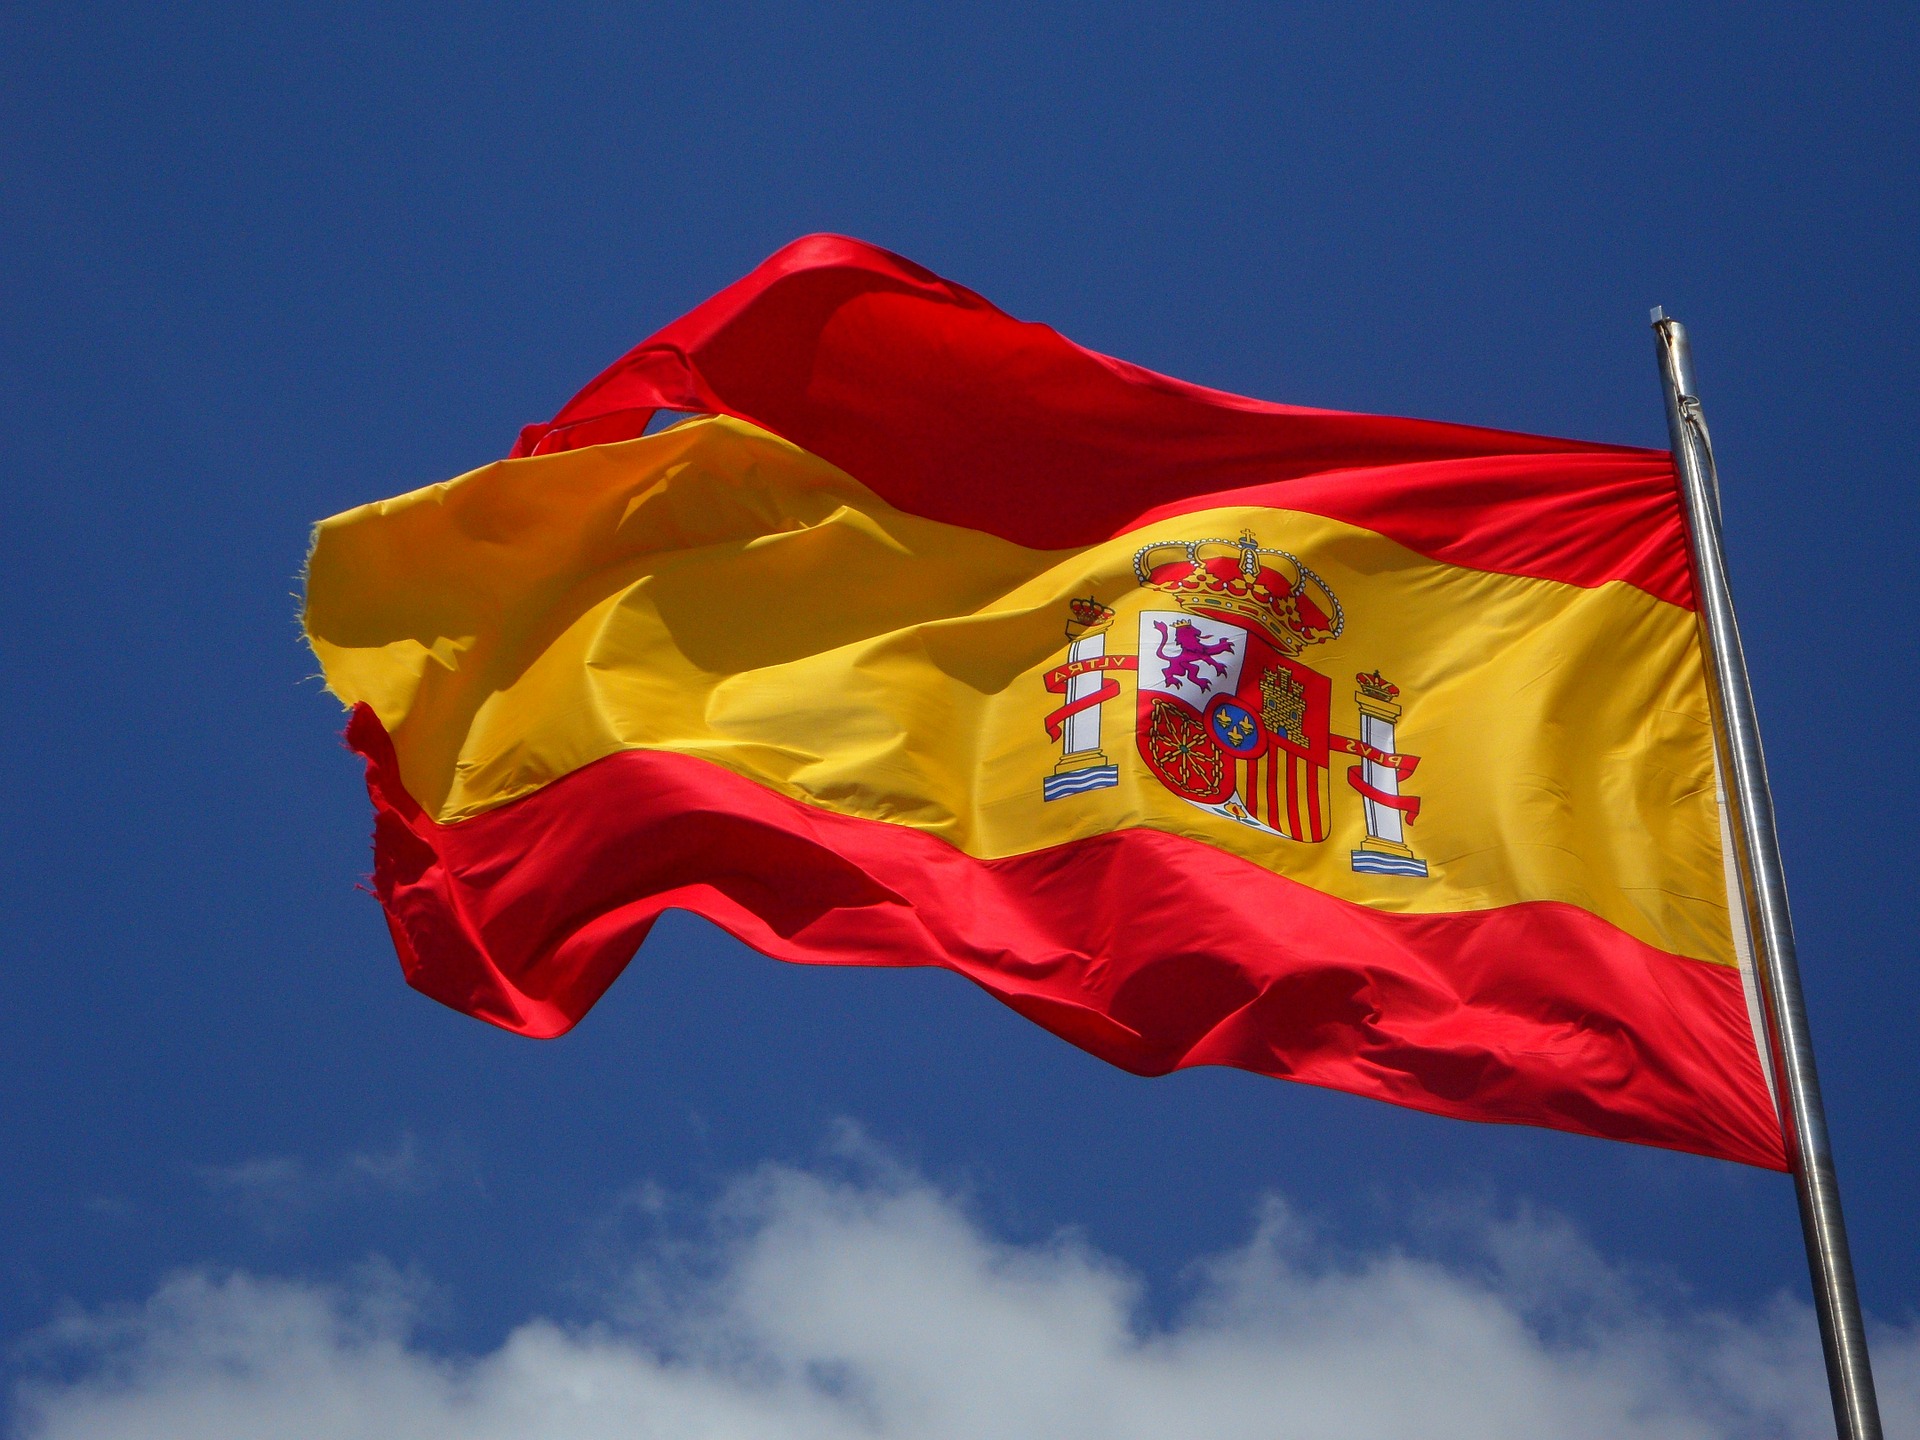 The flag of Spain (Photo credit: Flickr)